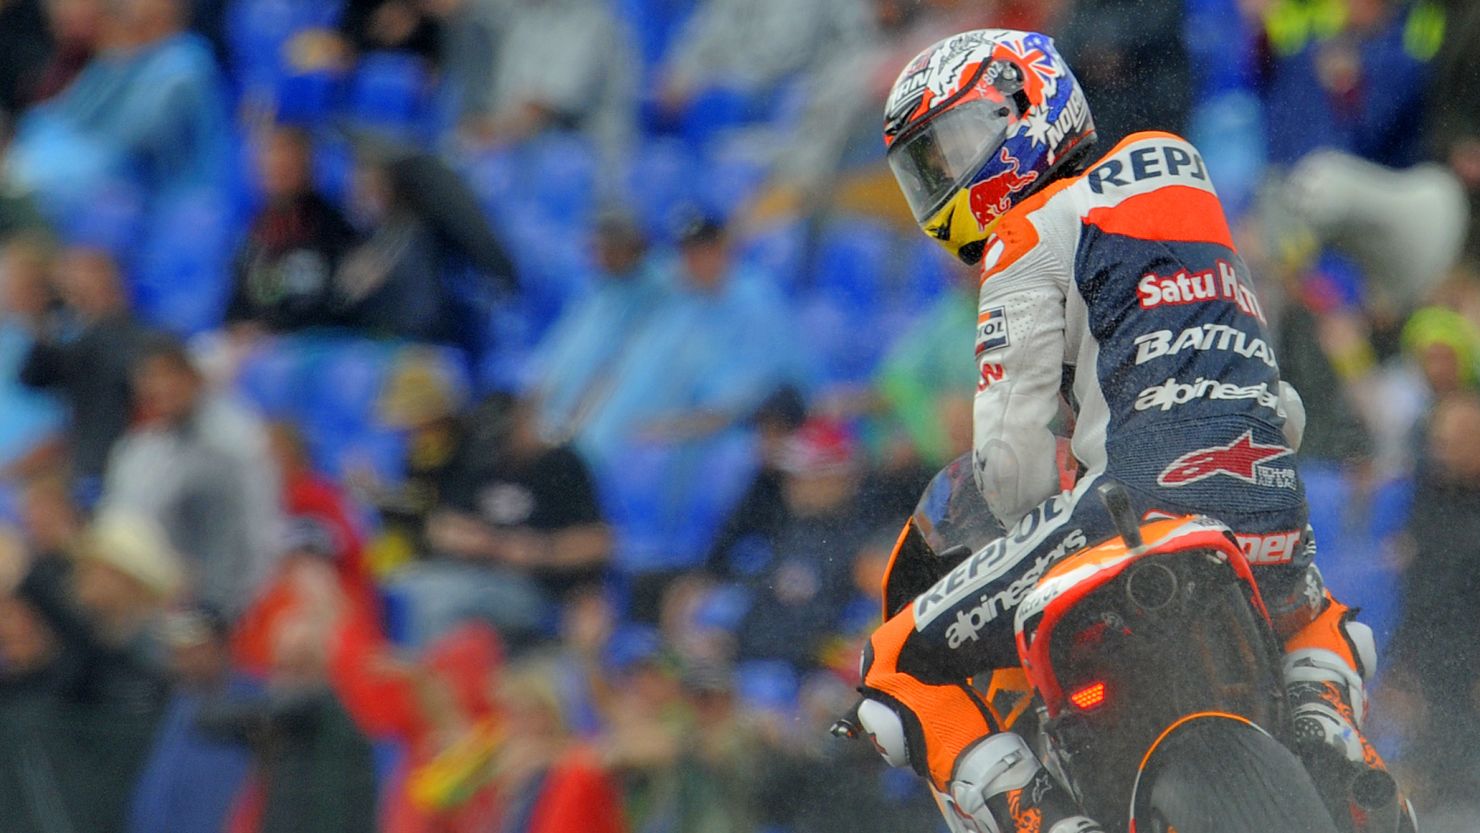 Casey Stoner looks back after setting the fastest lap in qualifying for the German MotoGP.